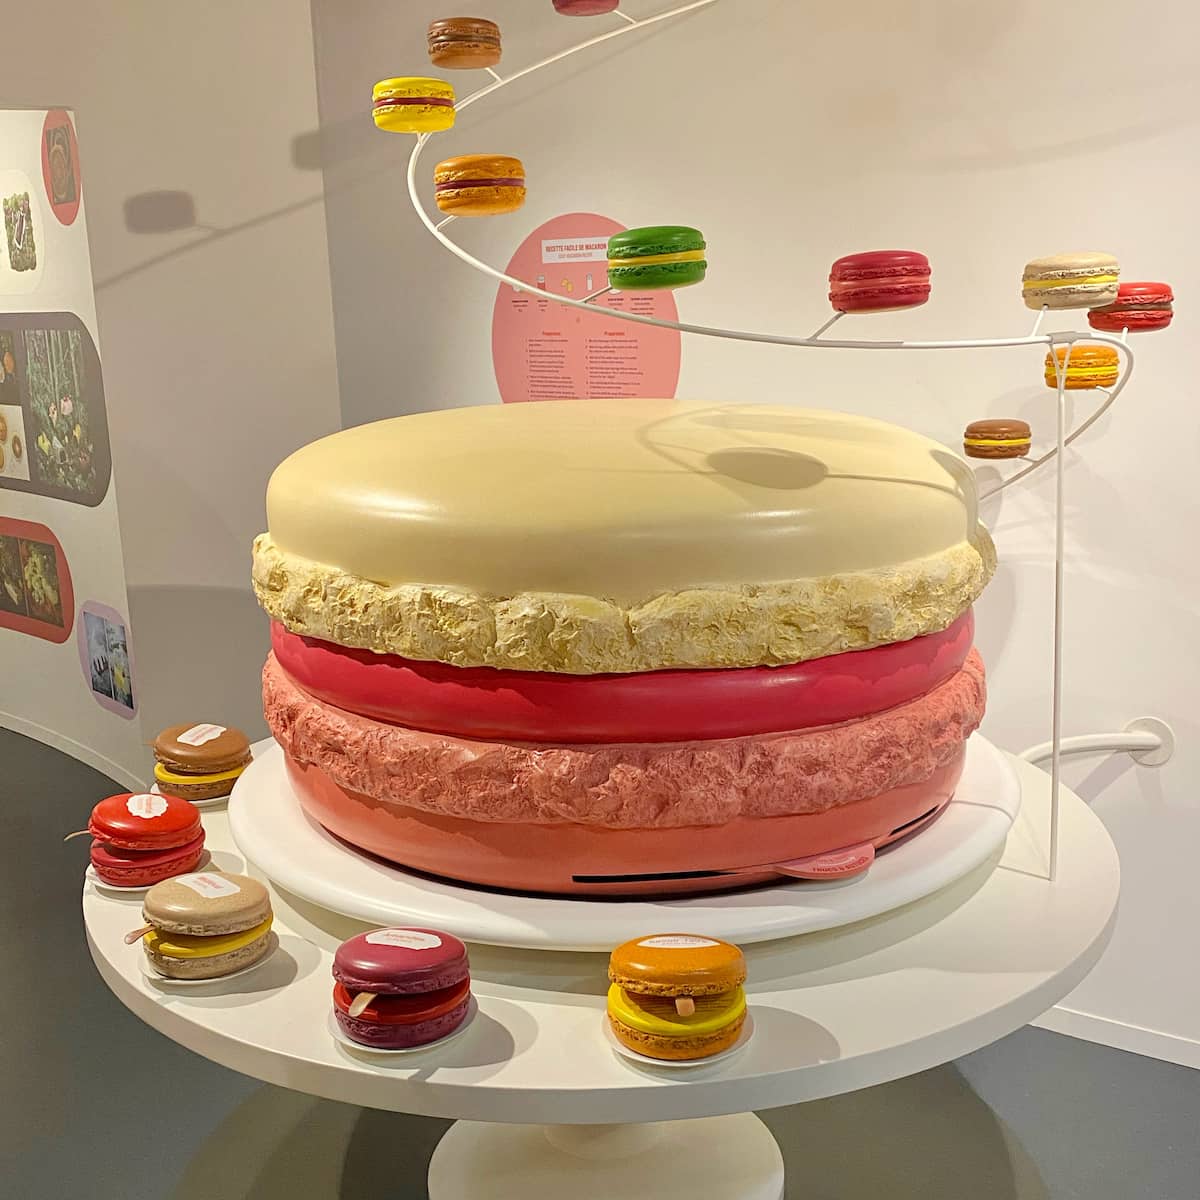 giant macaron at French patisserie exhibition